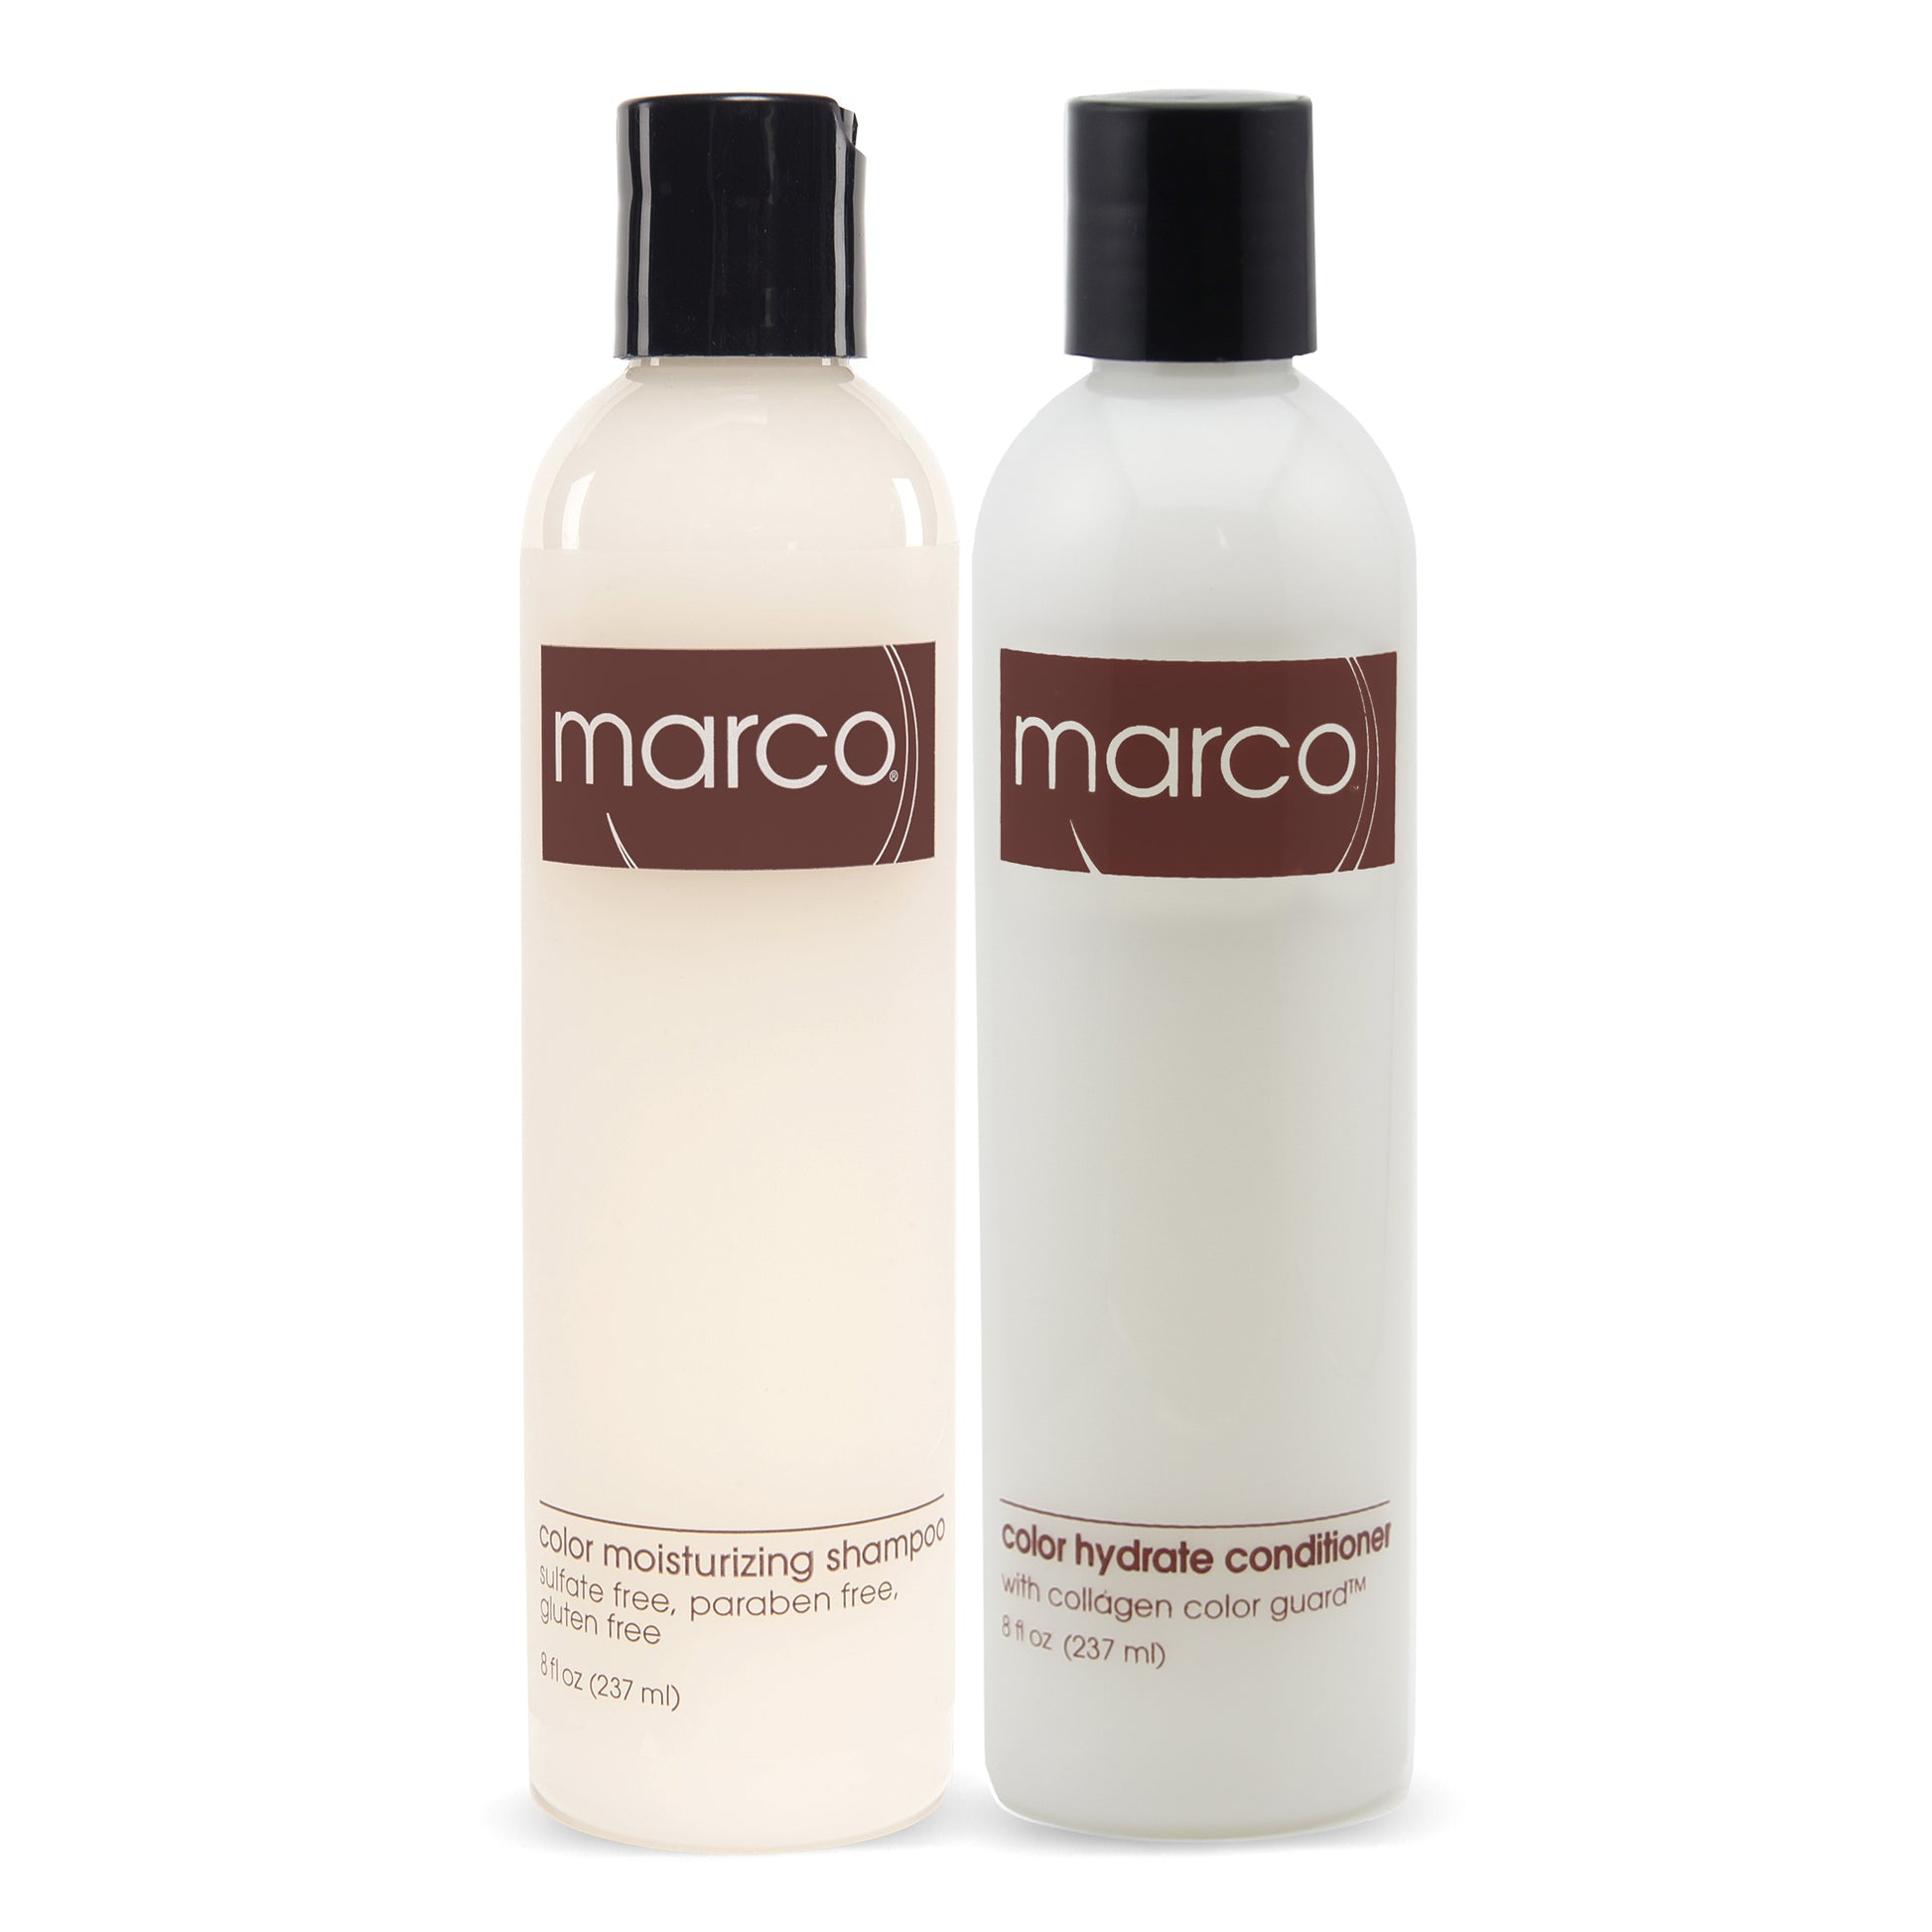 Two Marco bottles, “color moisturizing shampoo” + “color hydrate conditioner”